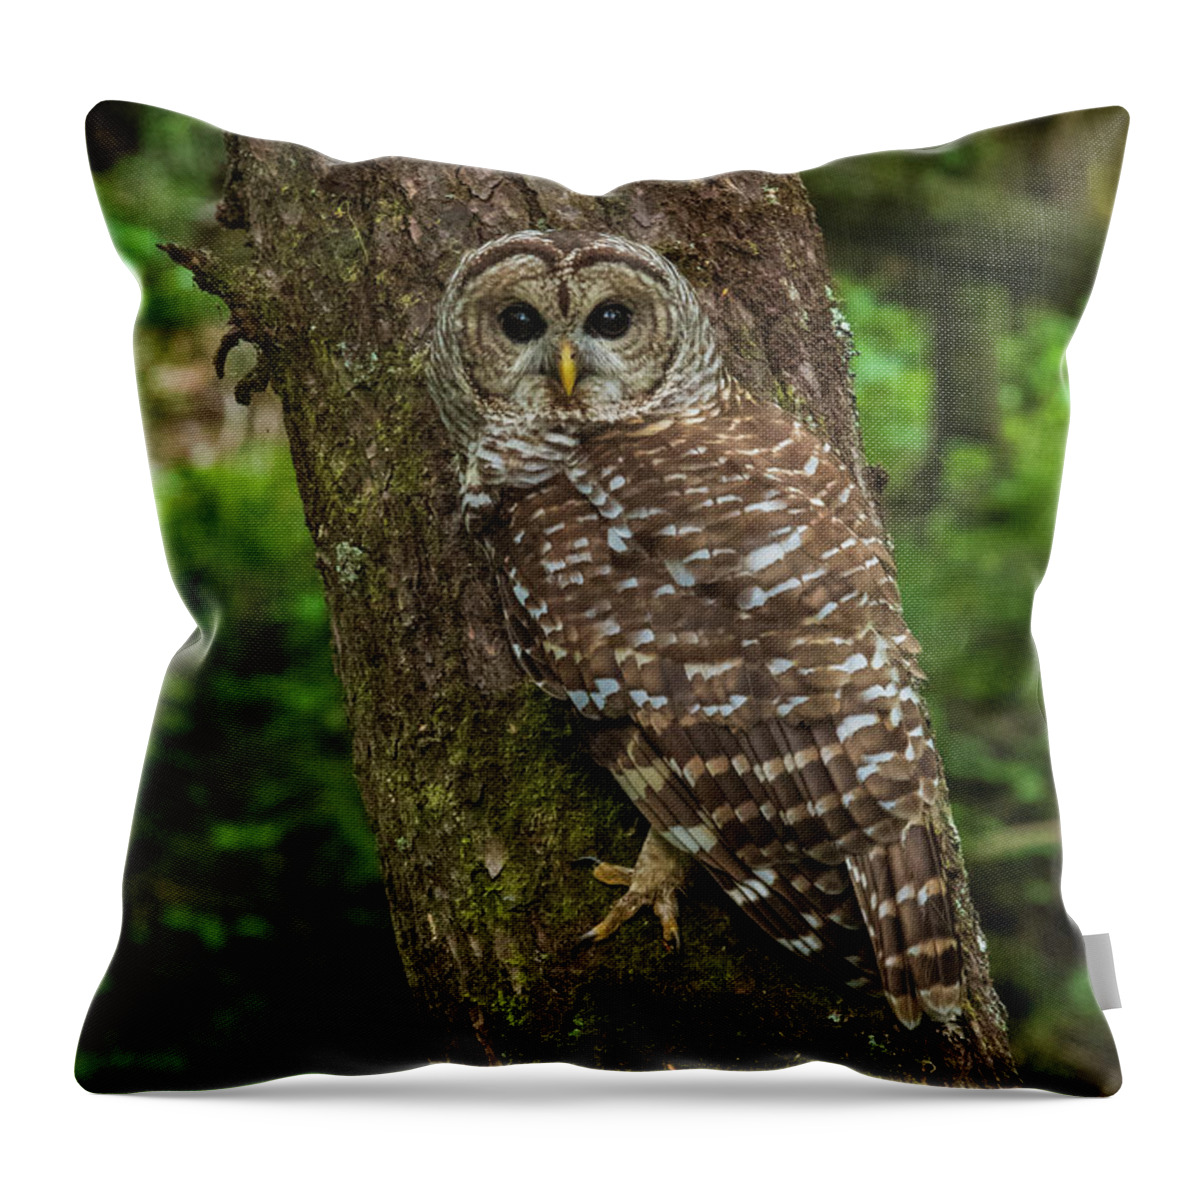 Great Smoky Mountains National Park Throw Pillow featuring the photograph Barred Owl 1 by Melissa Southern